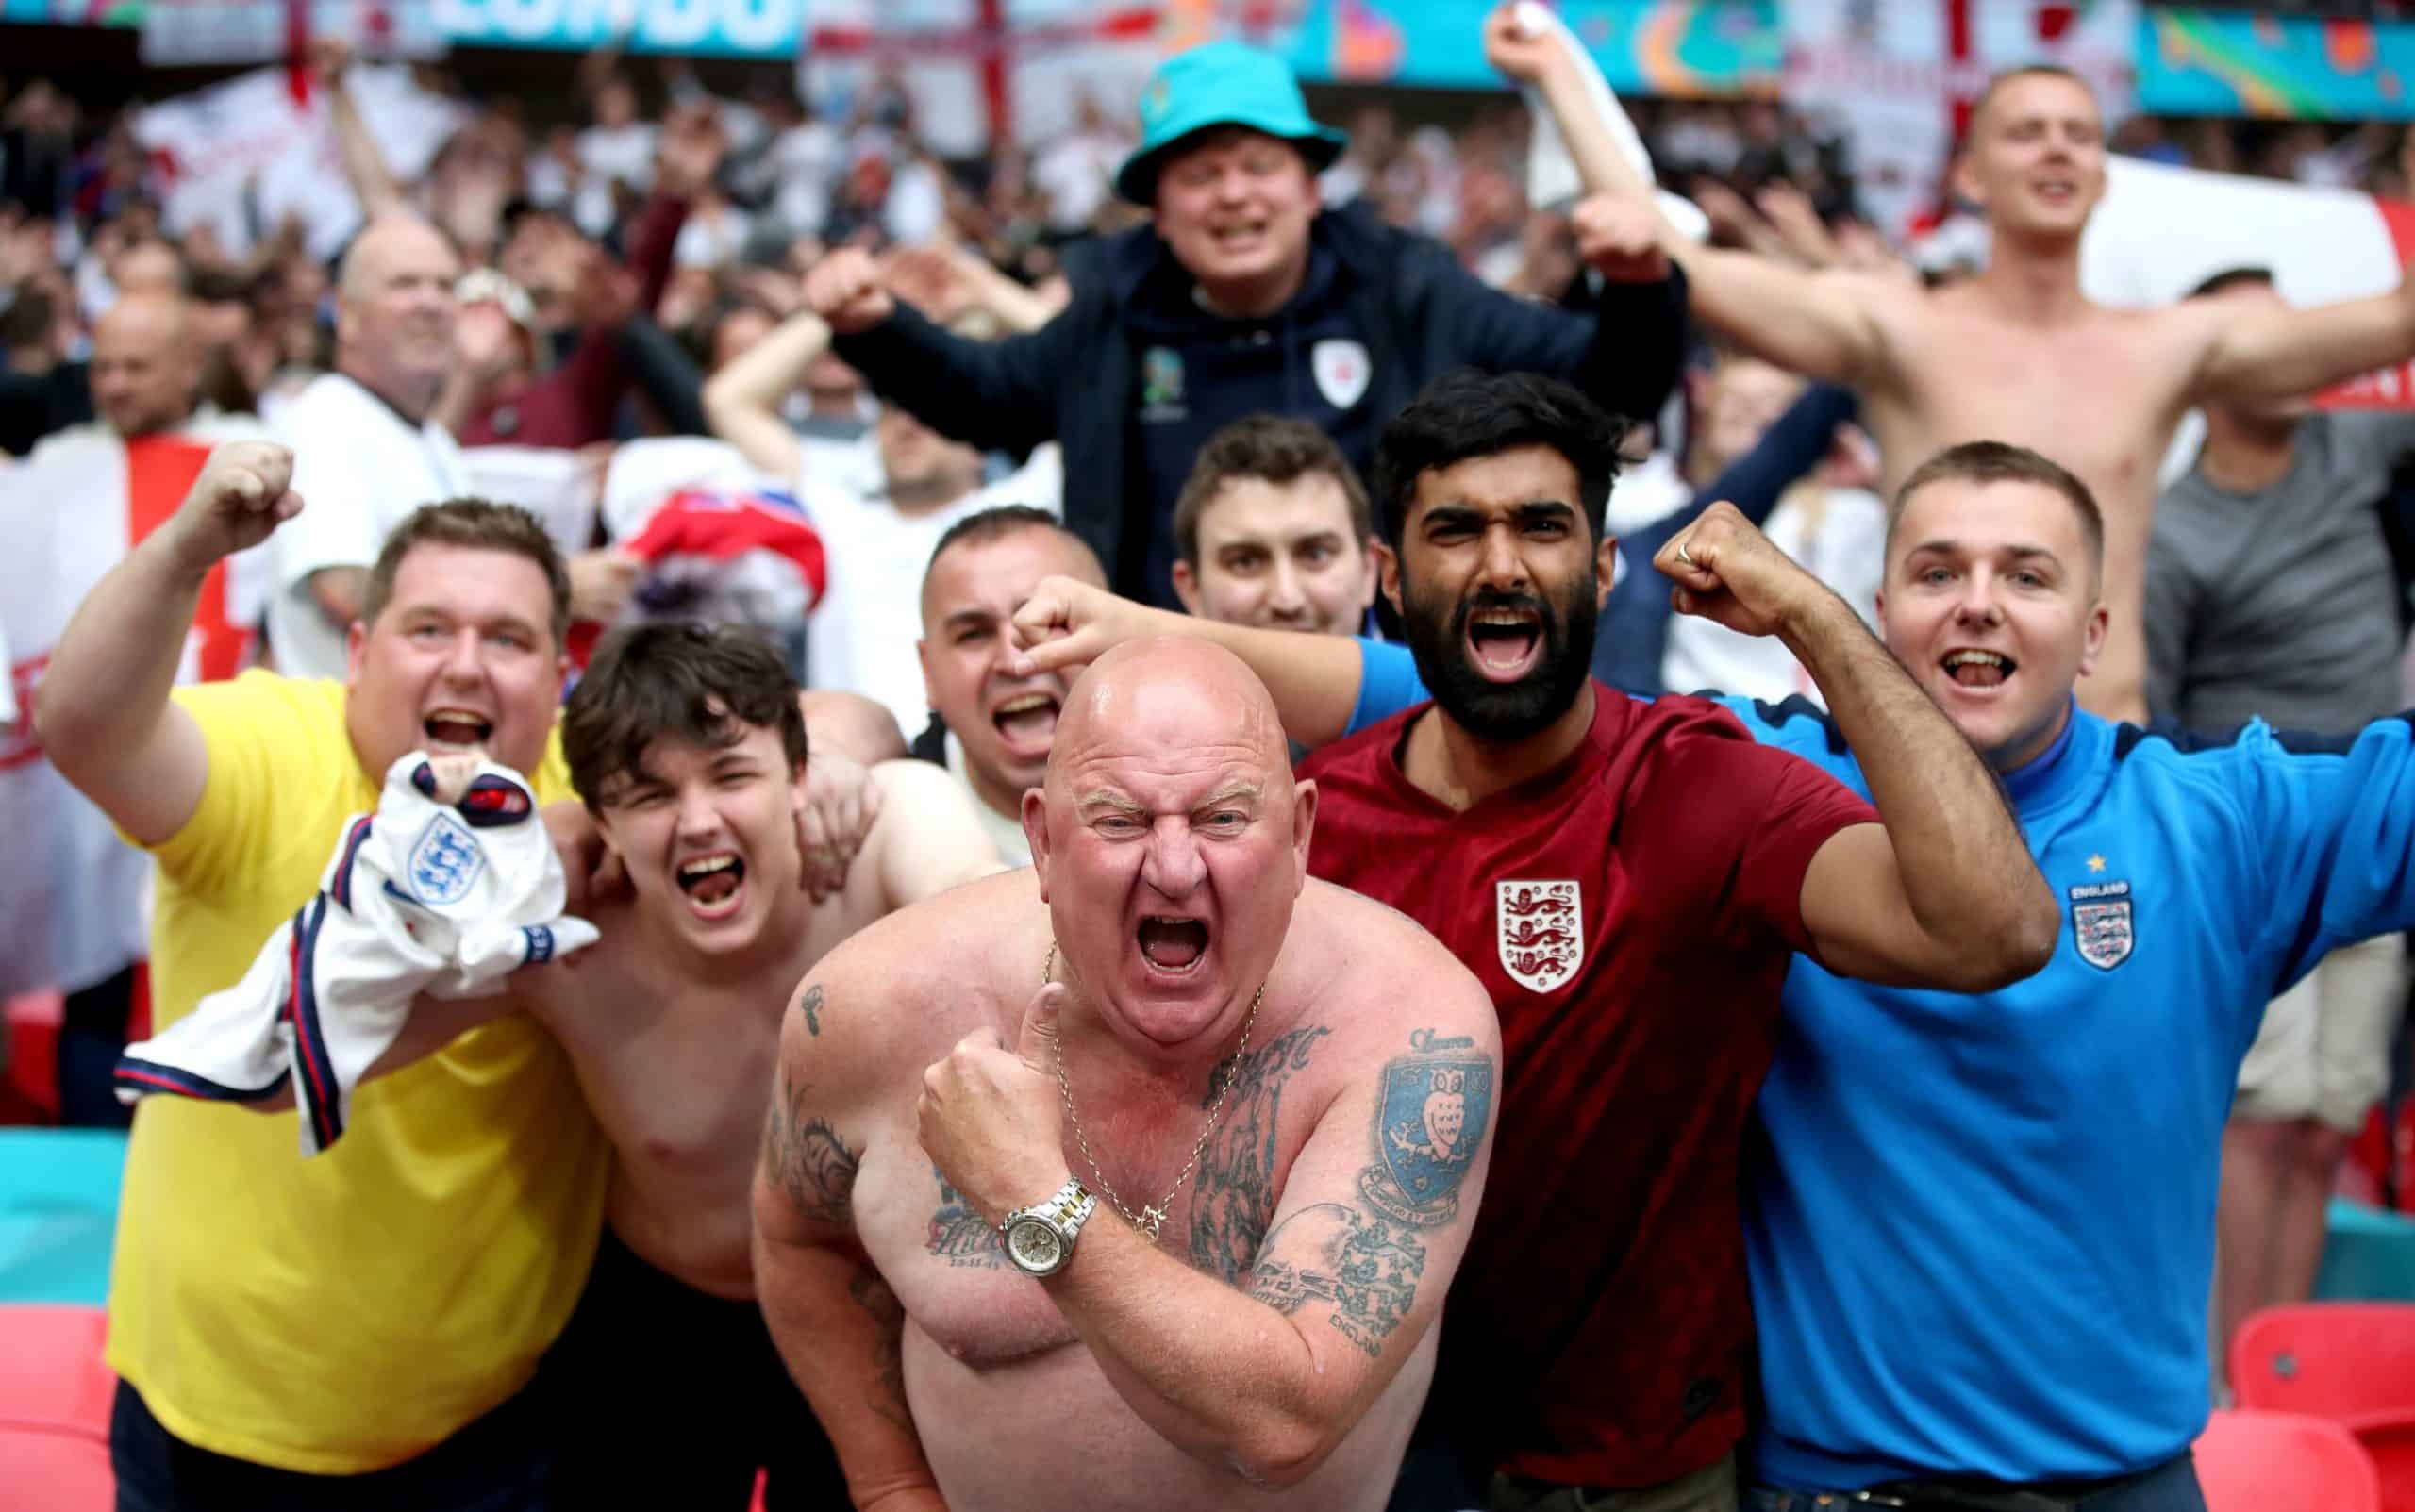 England ‘can give fans something to cheer about’ as pundits predict win